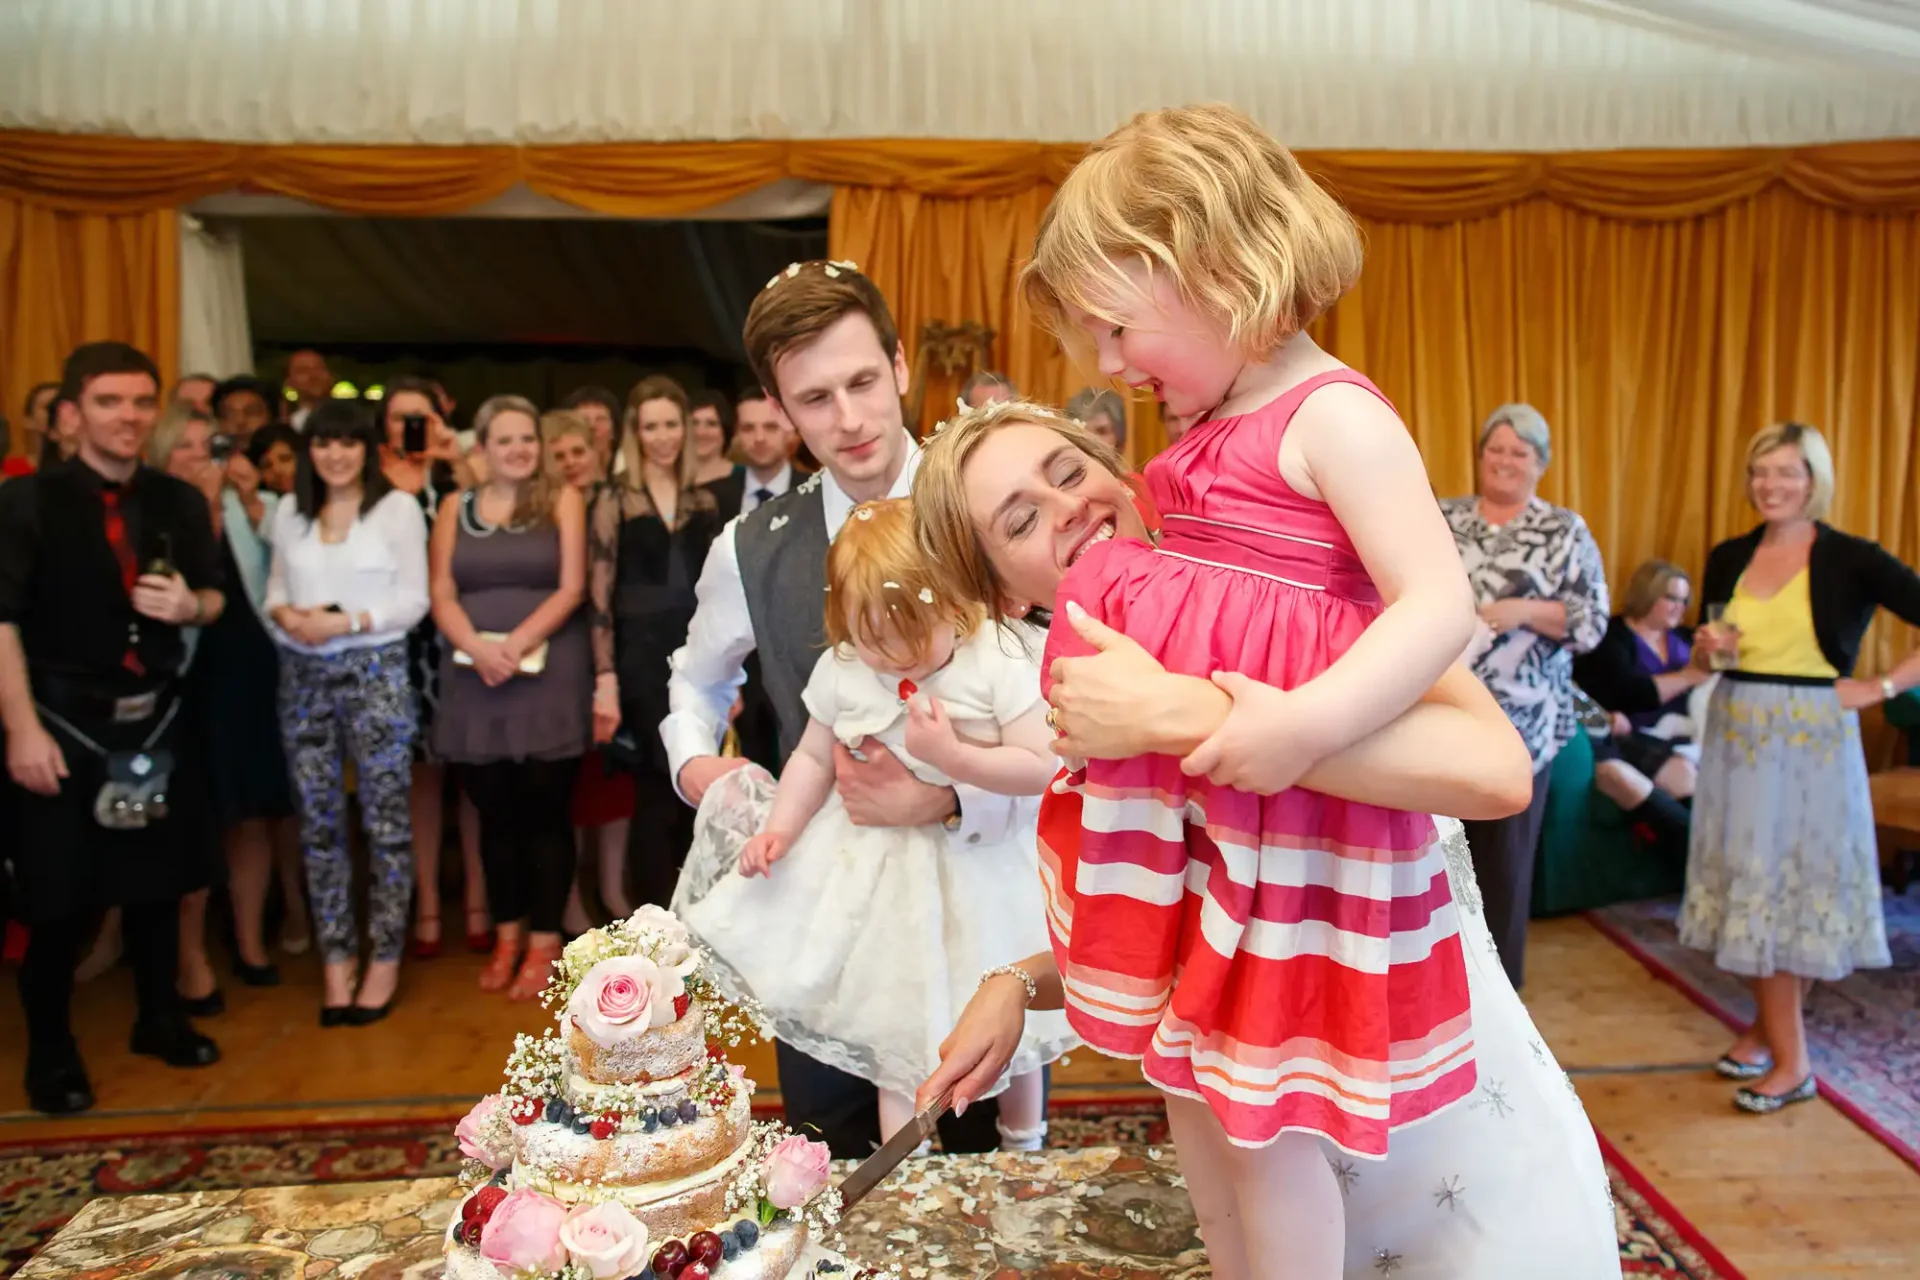 A mother with a toy doll kissing a young girl in a striped dress at a wedding, with guests observing and a man beside them looking on.